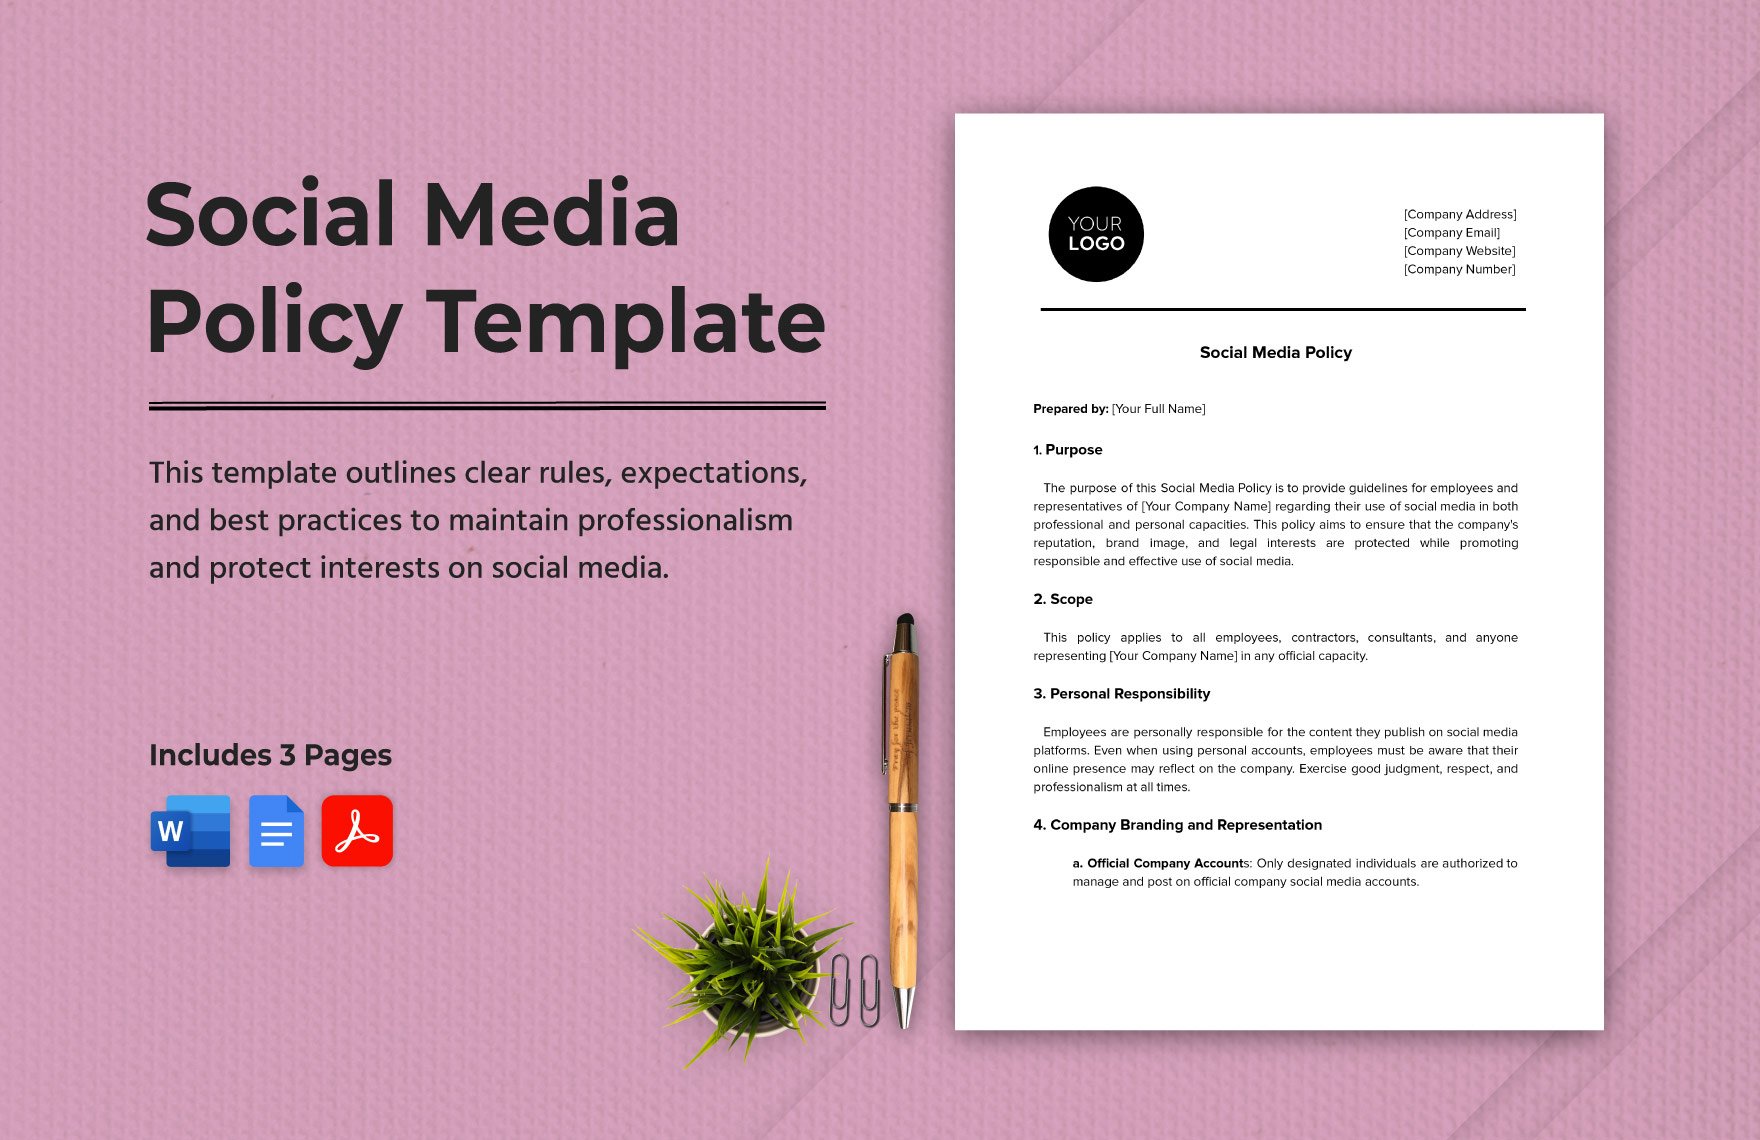 Social Media Policy Template in Word, Google Docs, PDF